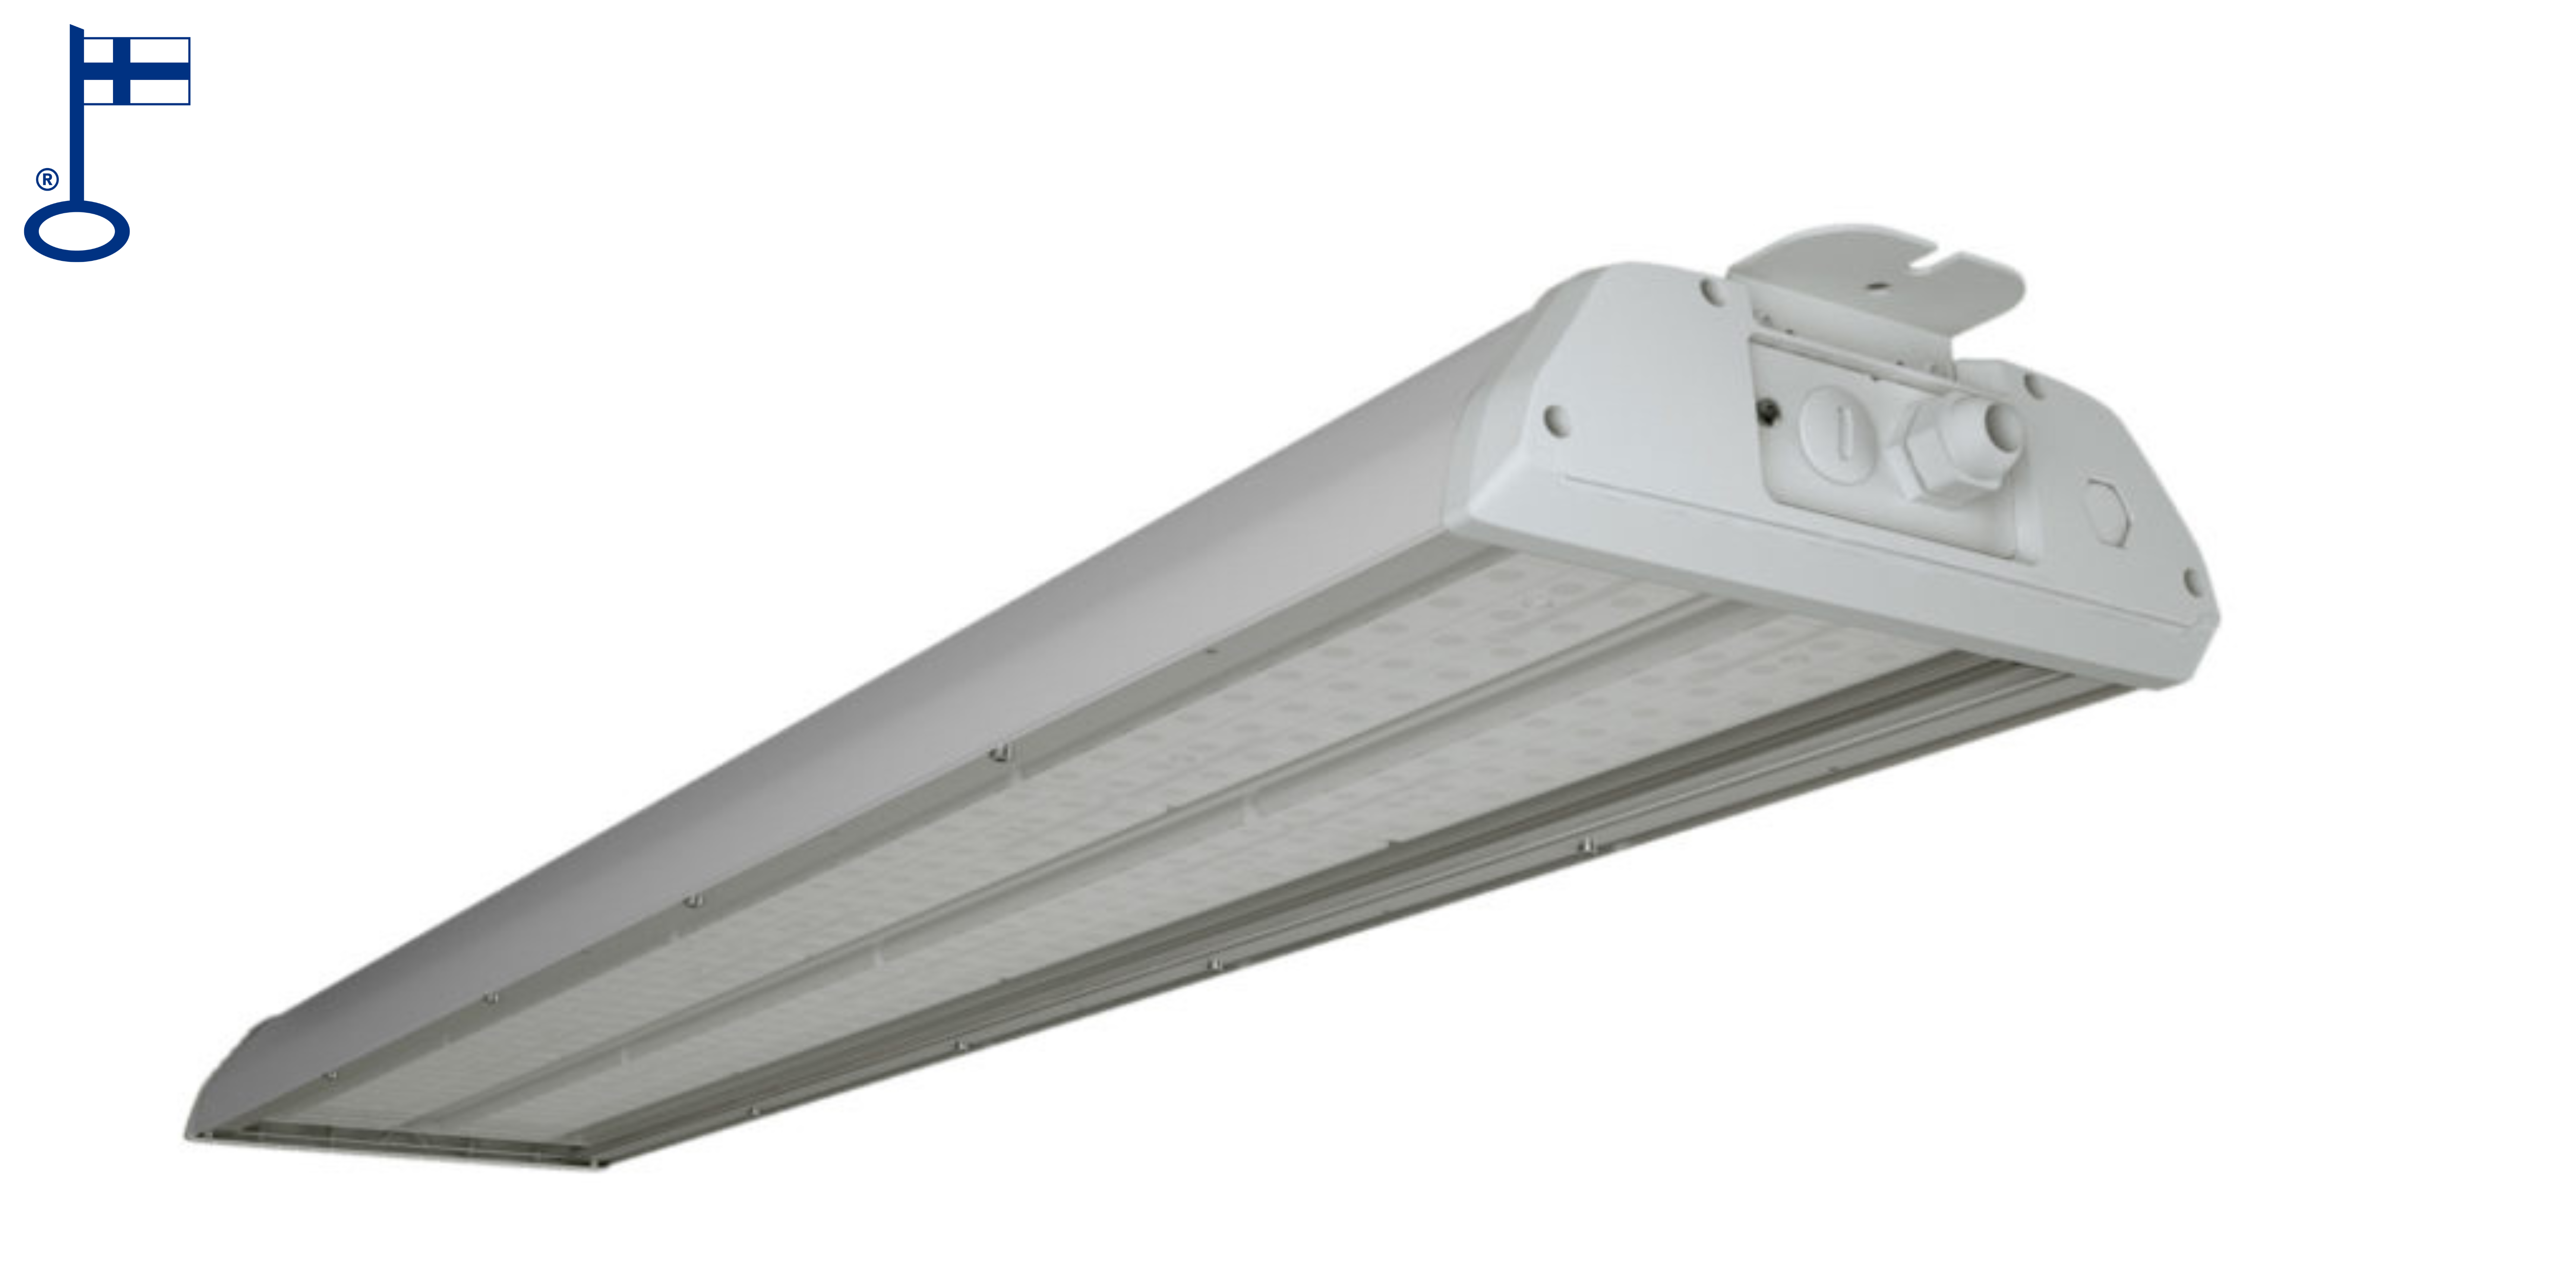 THE NEW SIGMA GEN3 AND SIGMA GEN3 PRO LUMINAIRES HAVE BEEN ADDED TO OUR PRODUCT RANGE